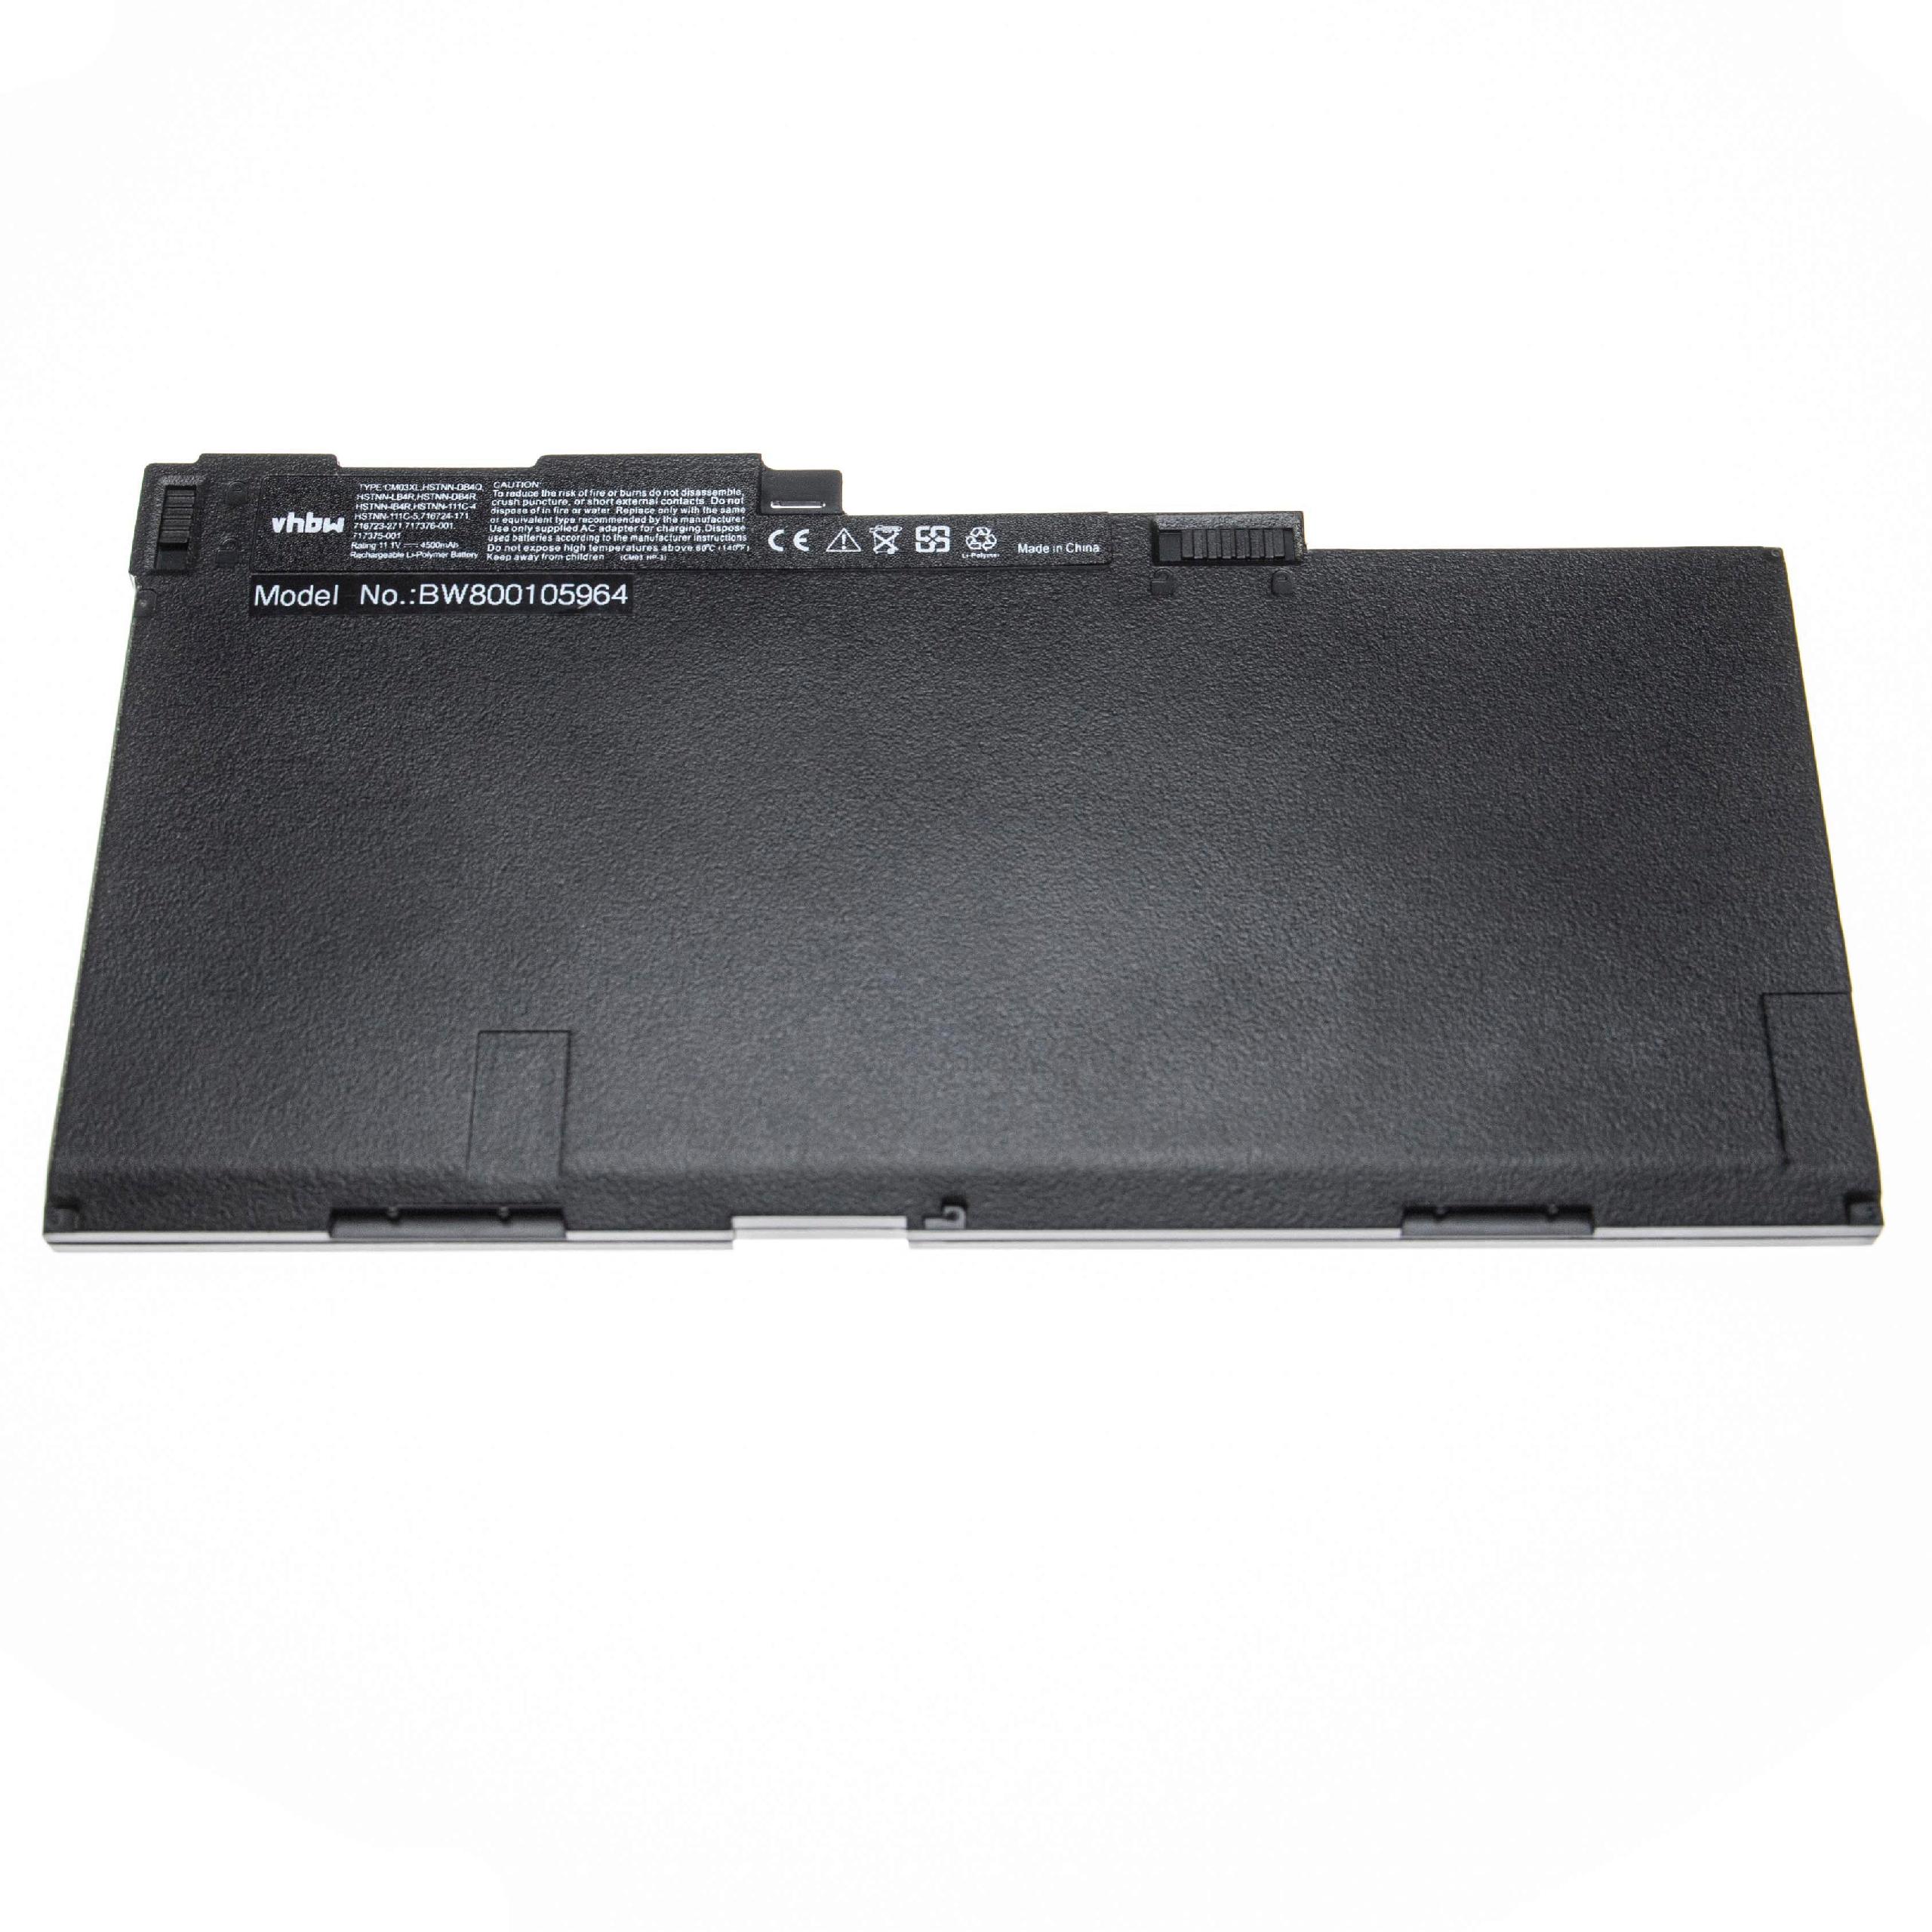 Notebook Battery Replacement for HP 716724-141, 716723-271, 716723-2C1 - 4500mAh 11.1V Li-polymer, black